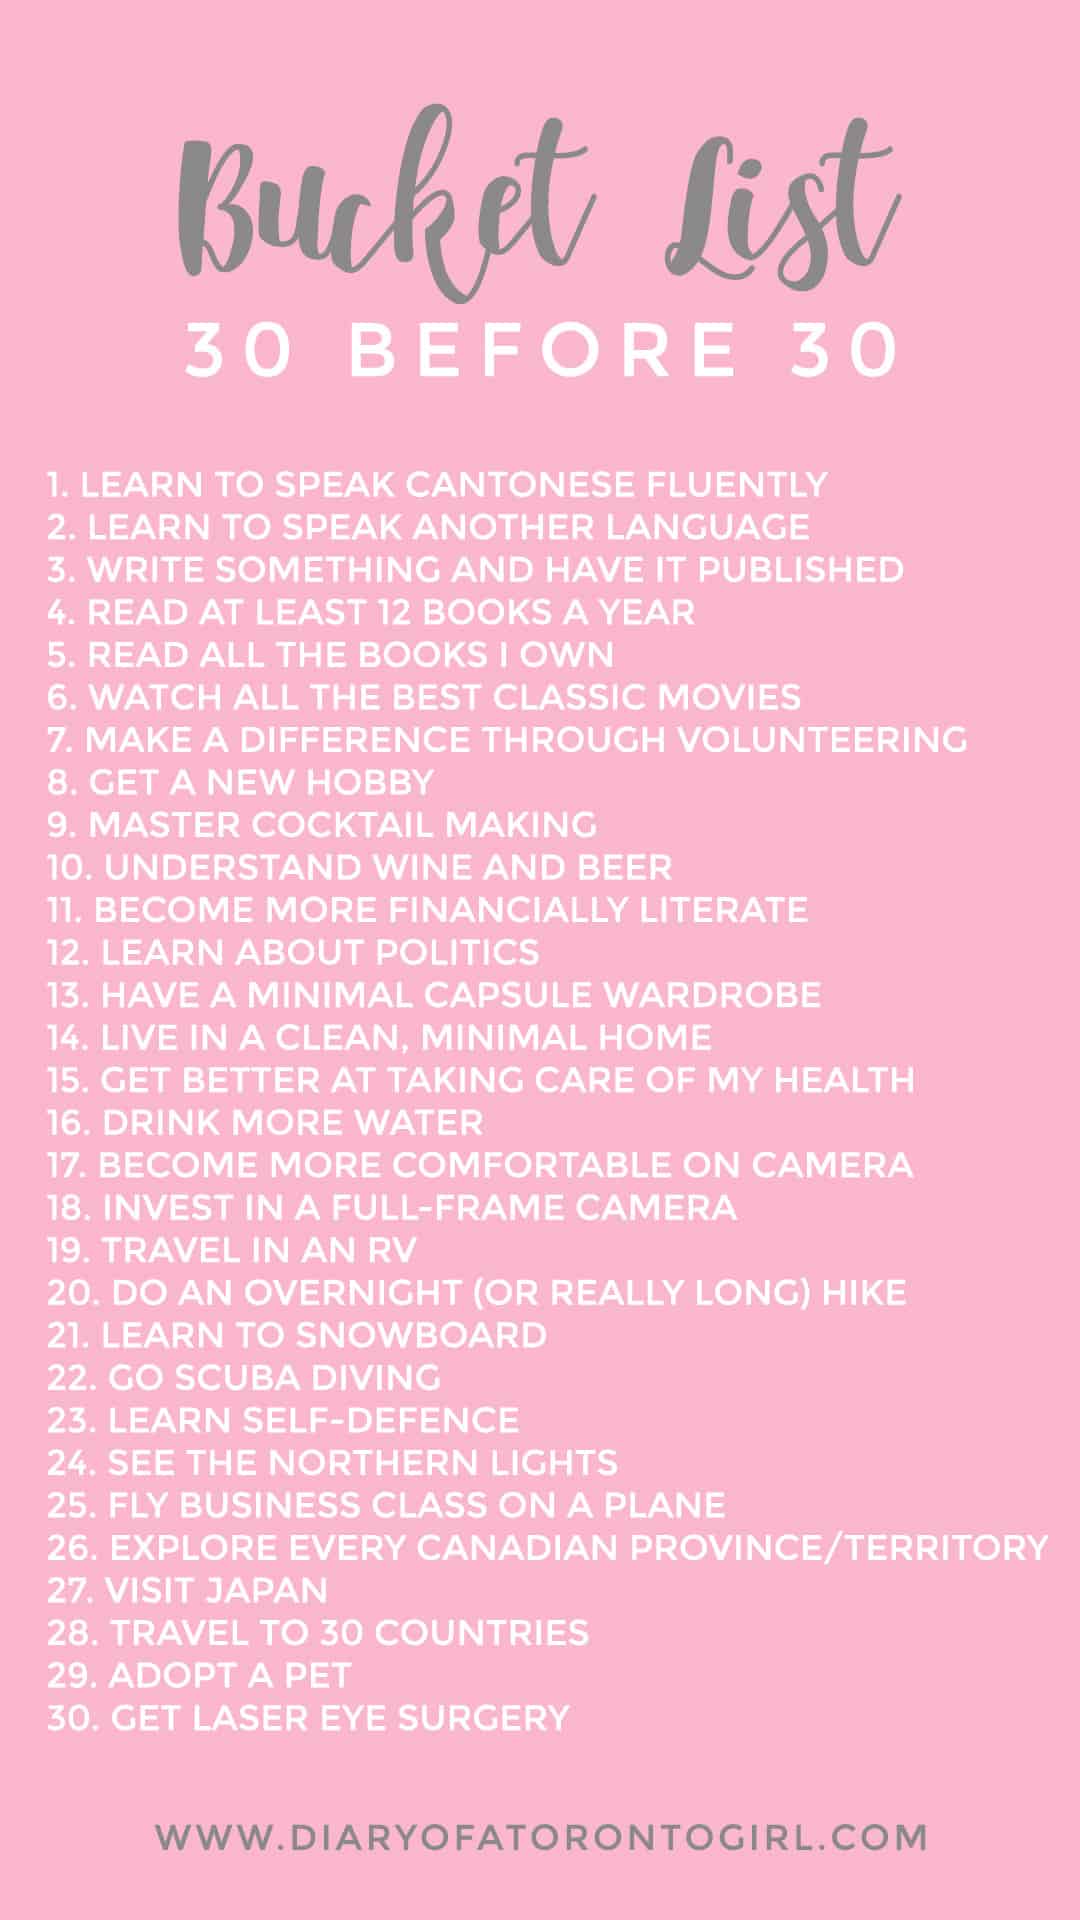 Looking for ideas on things to do before you turn 30? Here's a realistic bucket list featuring things to achieve before you turn 30 years old.